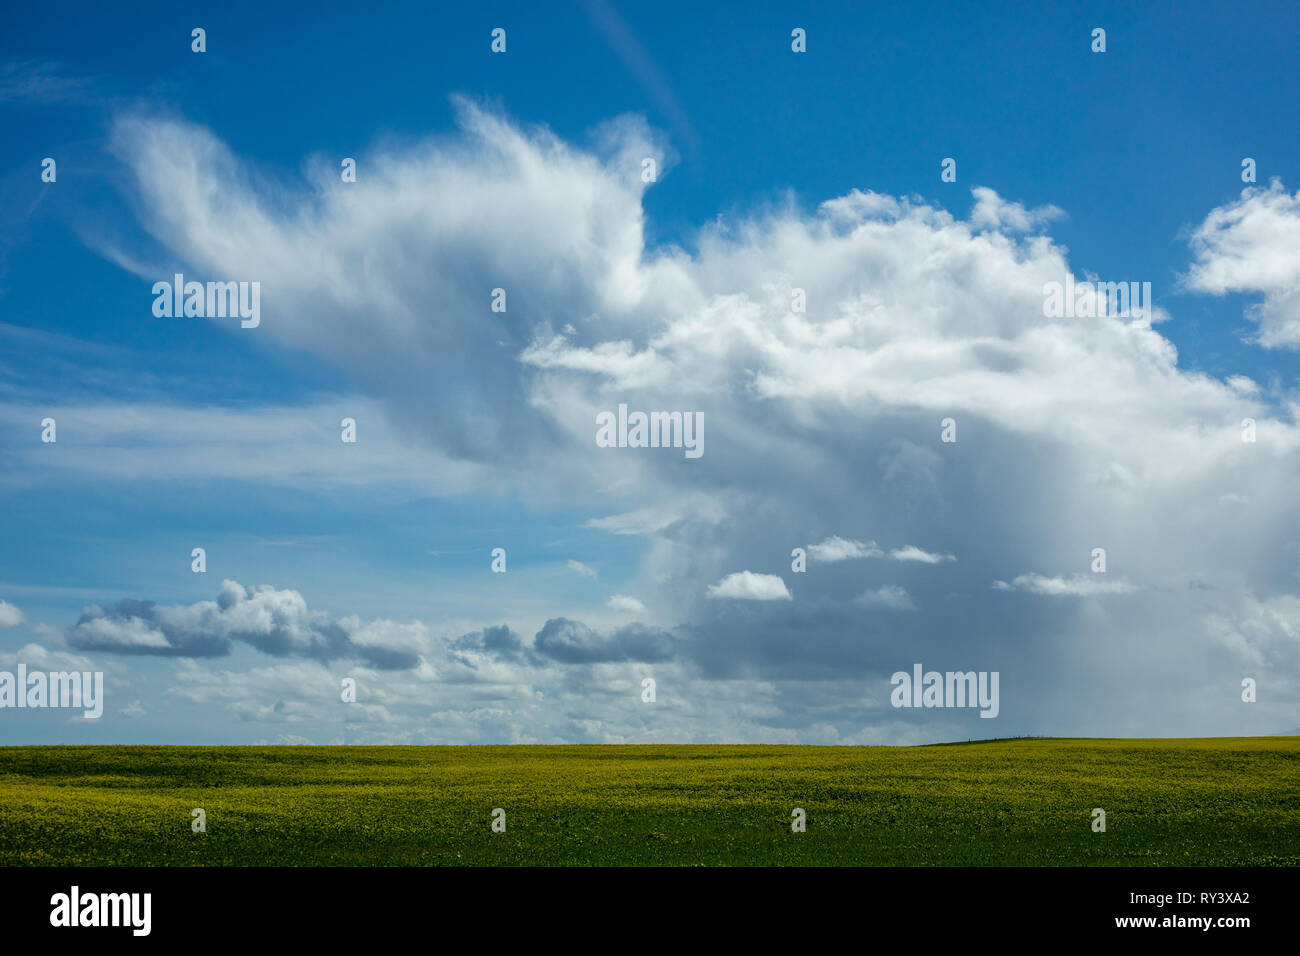 Sunny blue sky with some clouds in California Stock Photo